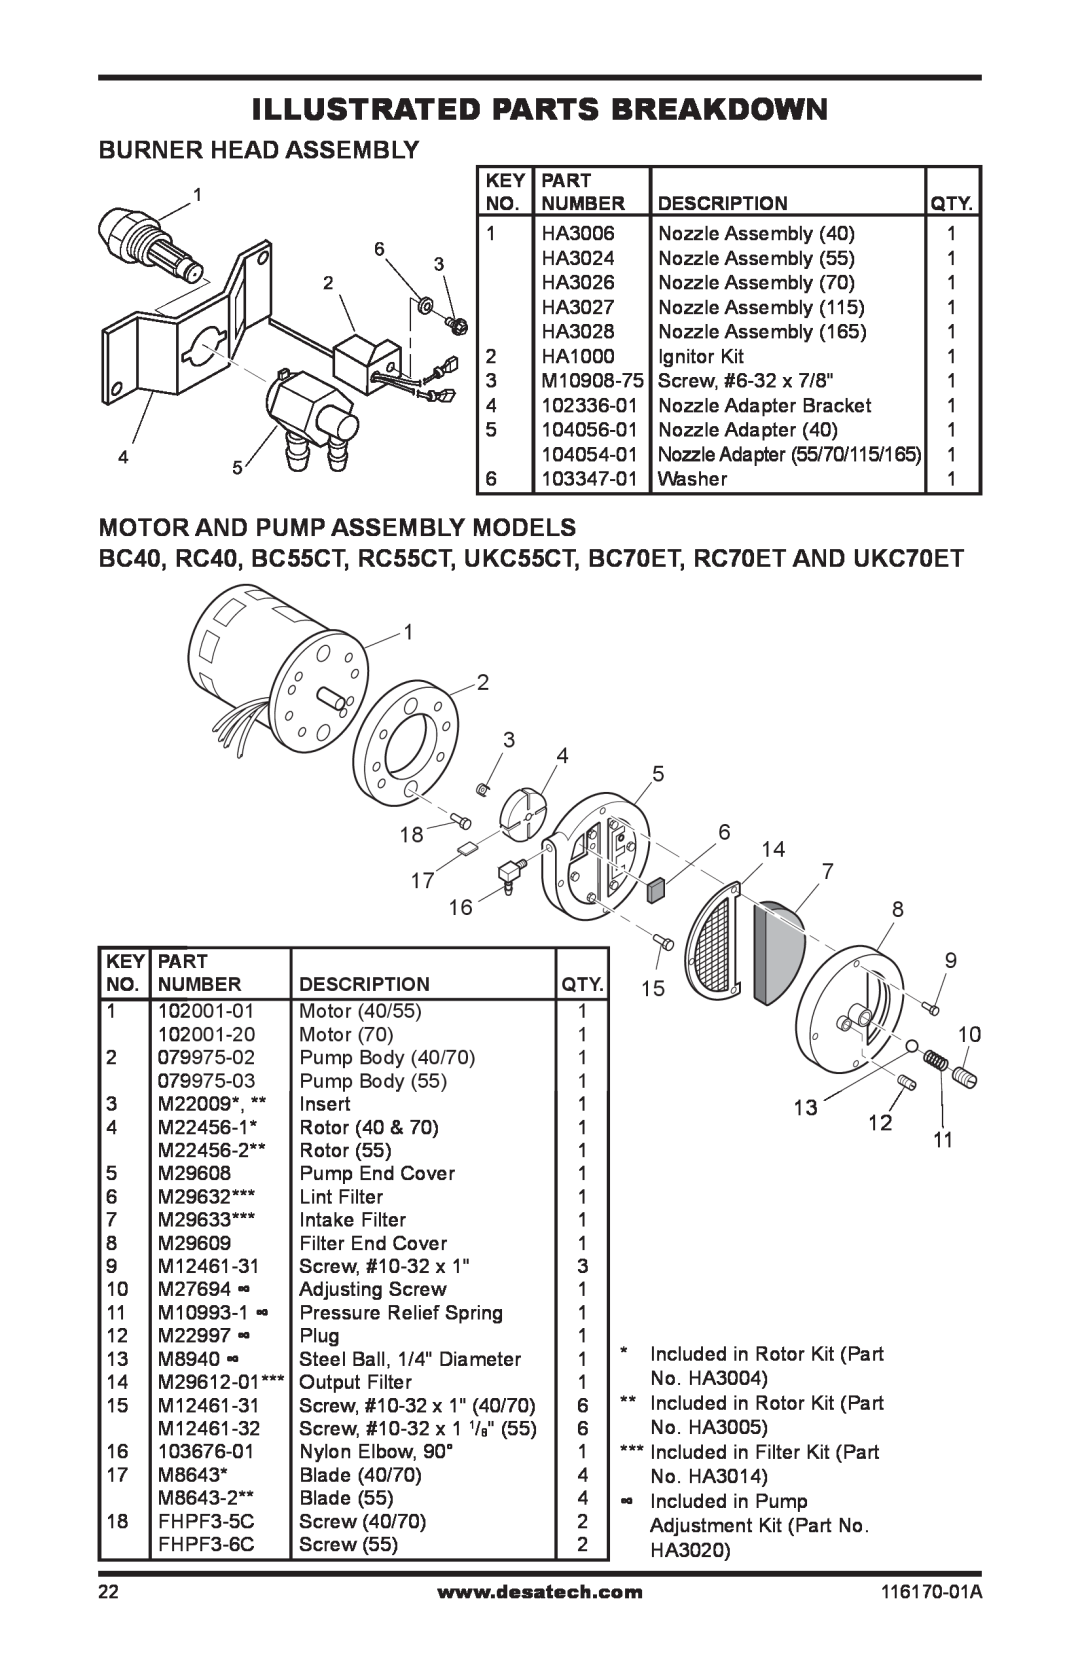 Desa RC165DT, BC55CT, BC115DT, BC165DT Illustrated Parts Breakdown, Burner Head Assembly, Motor And Pump Assembly Models 